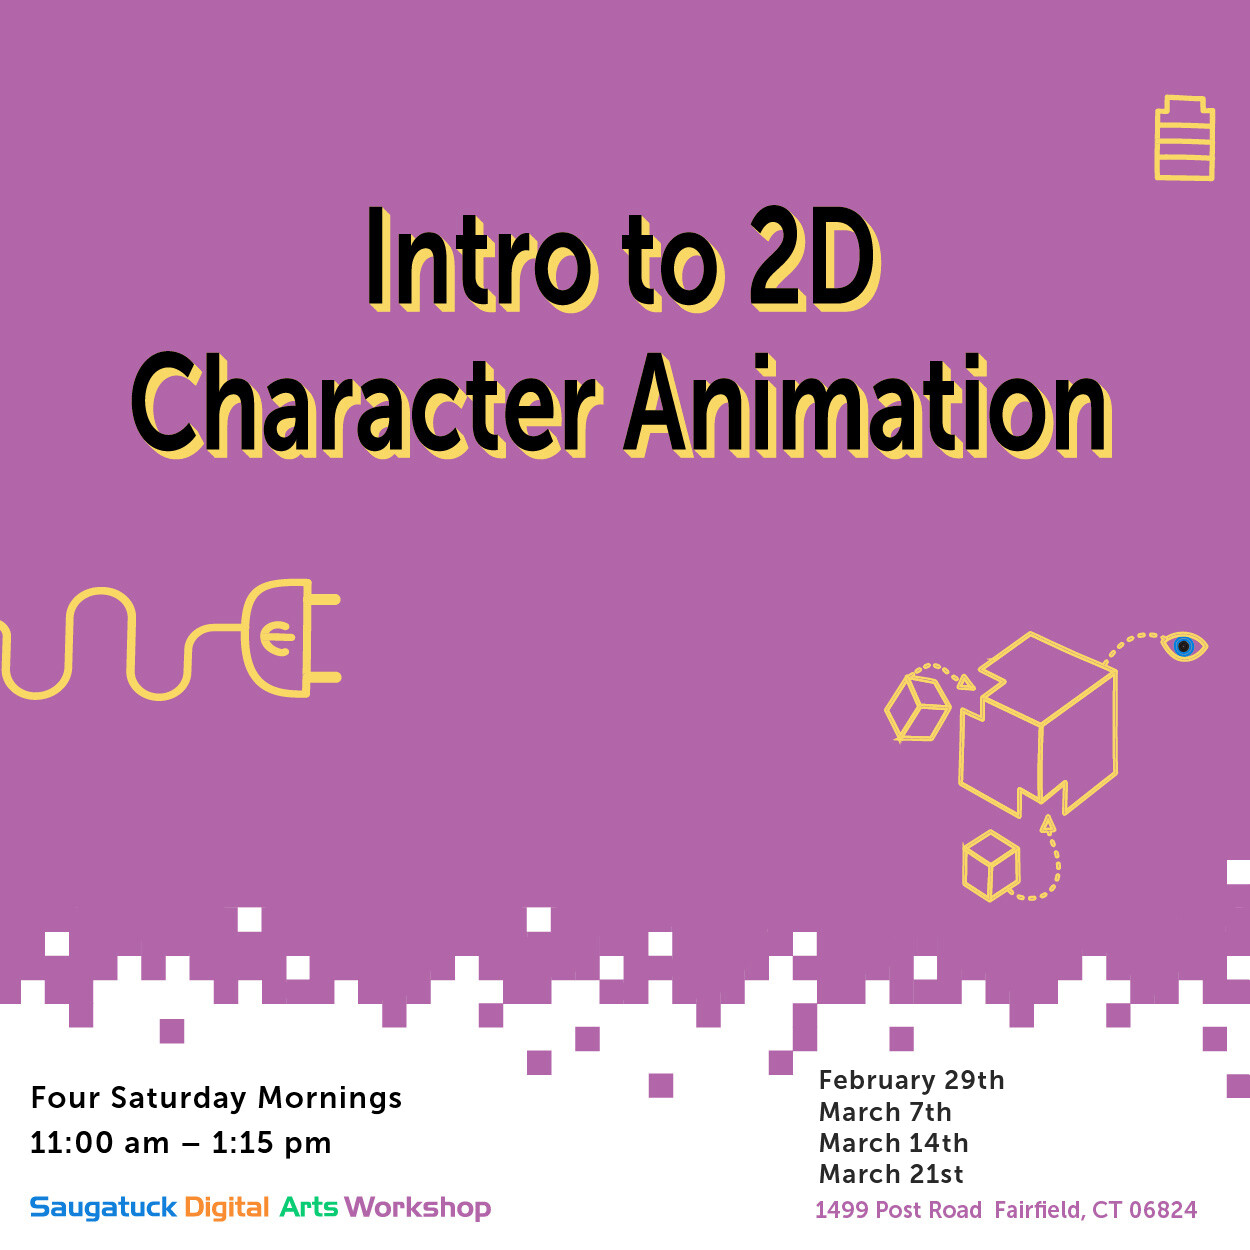 Intro to 2D Character Animation